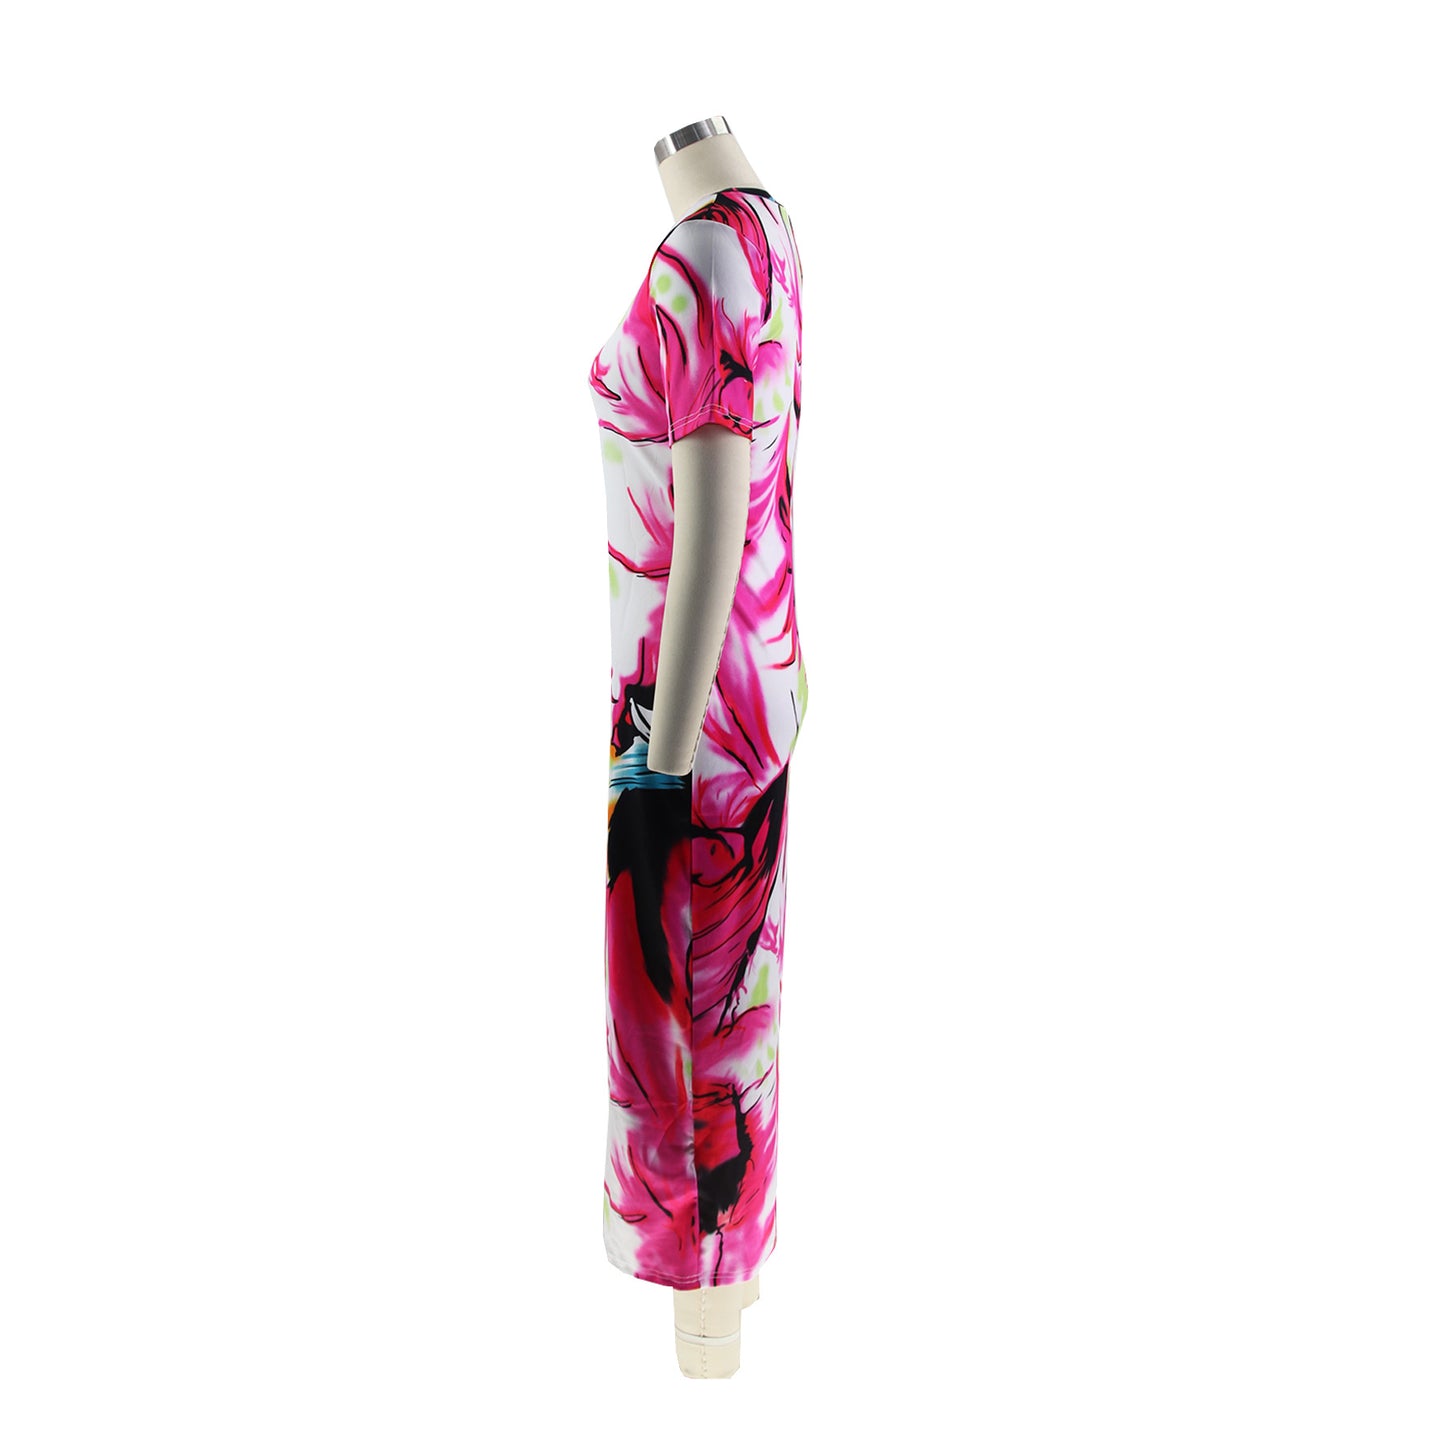 BamBam Summer Ladies Fitted Round Neck Painted Print Dress - BamBam